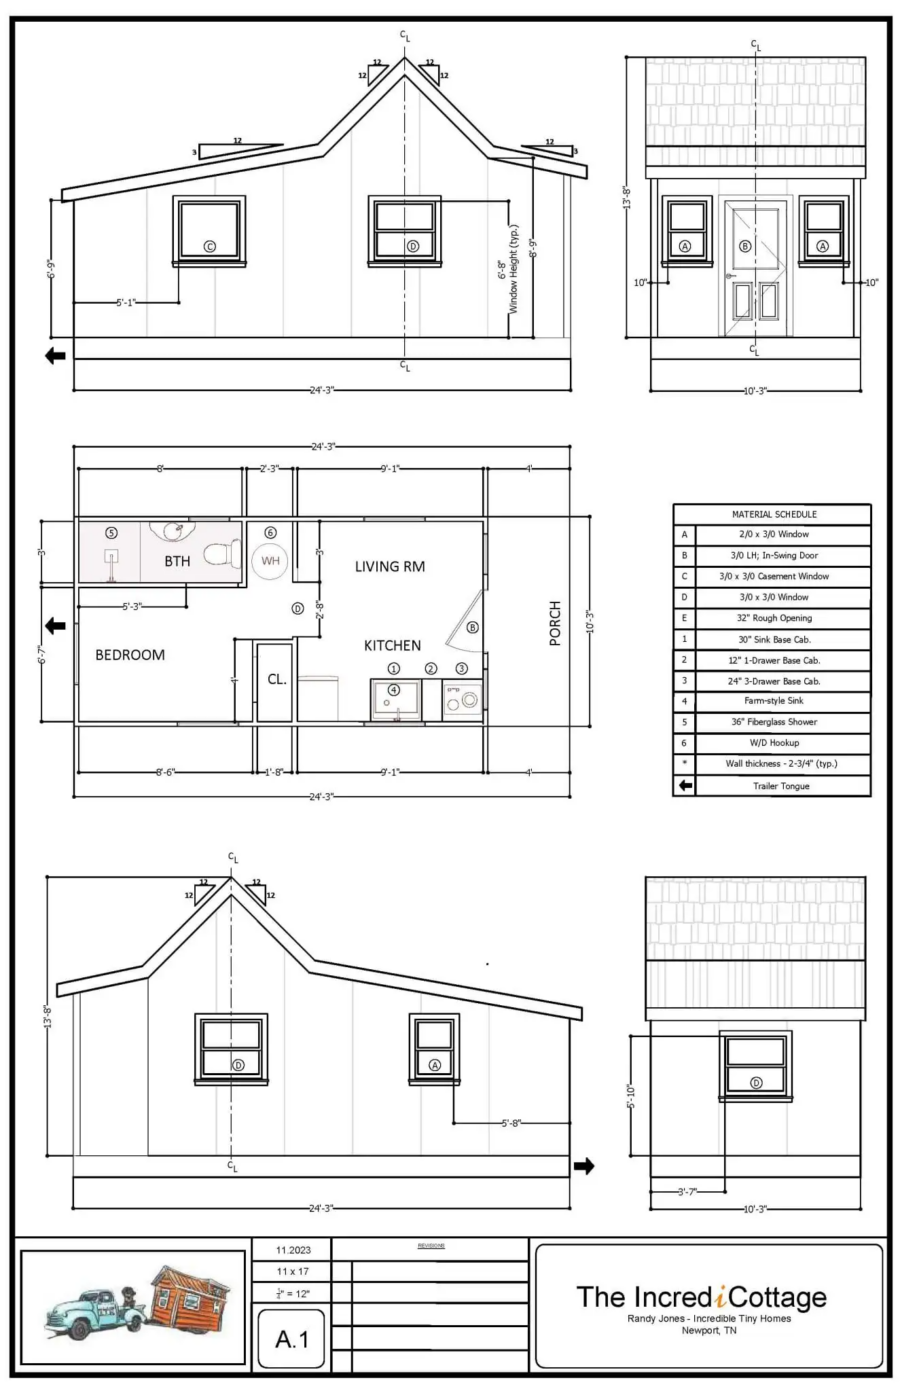 Incred-i-Cottage-A1-Floor-Plan-Updated-110923-scaled